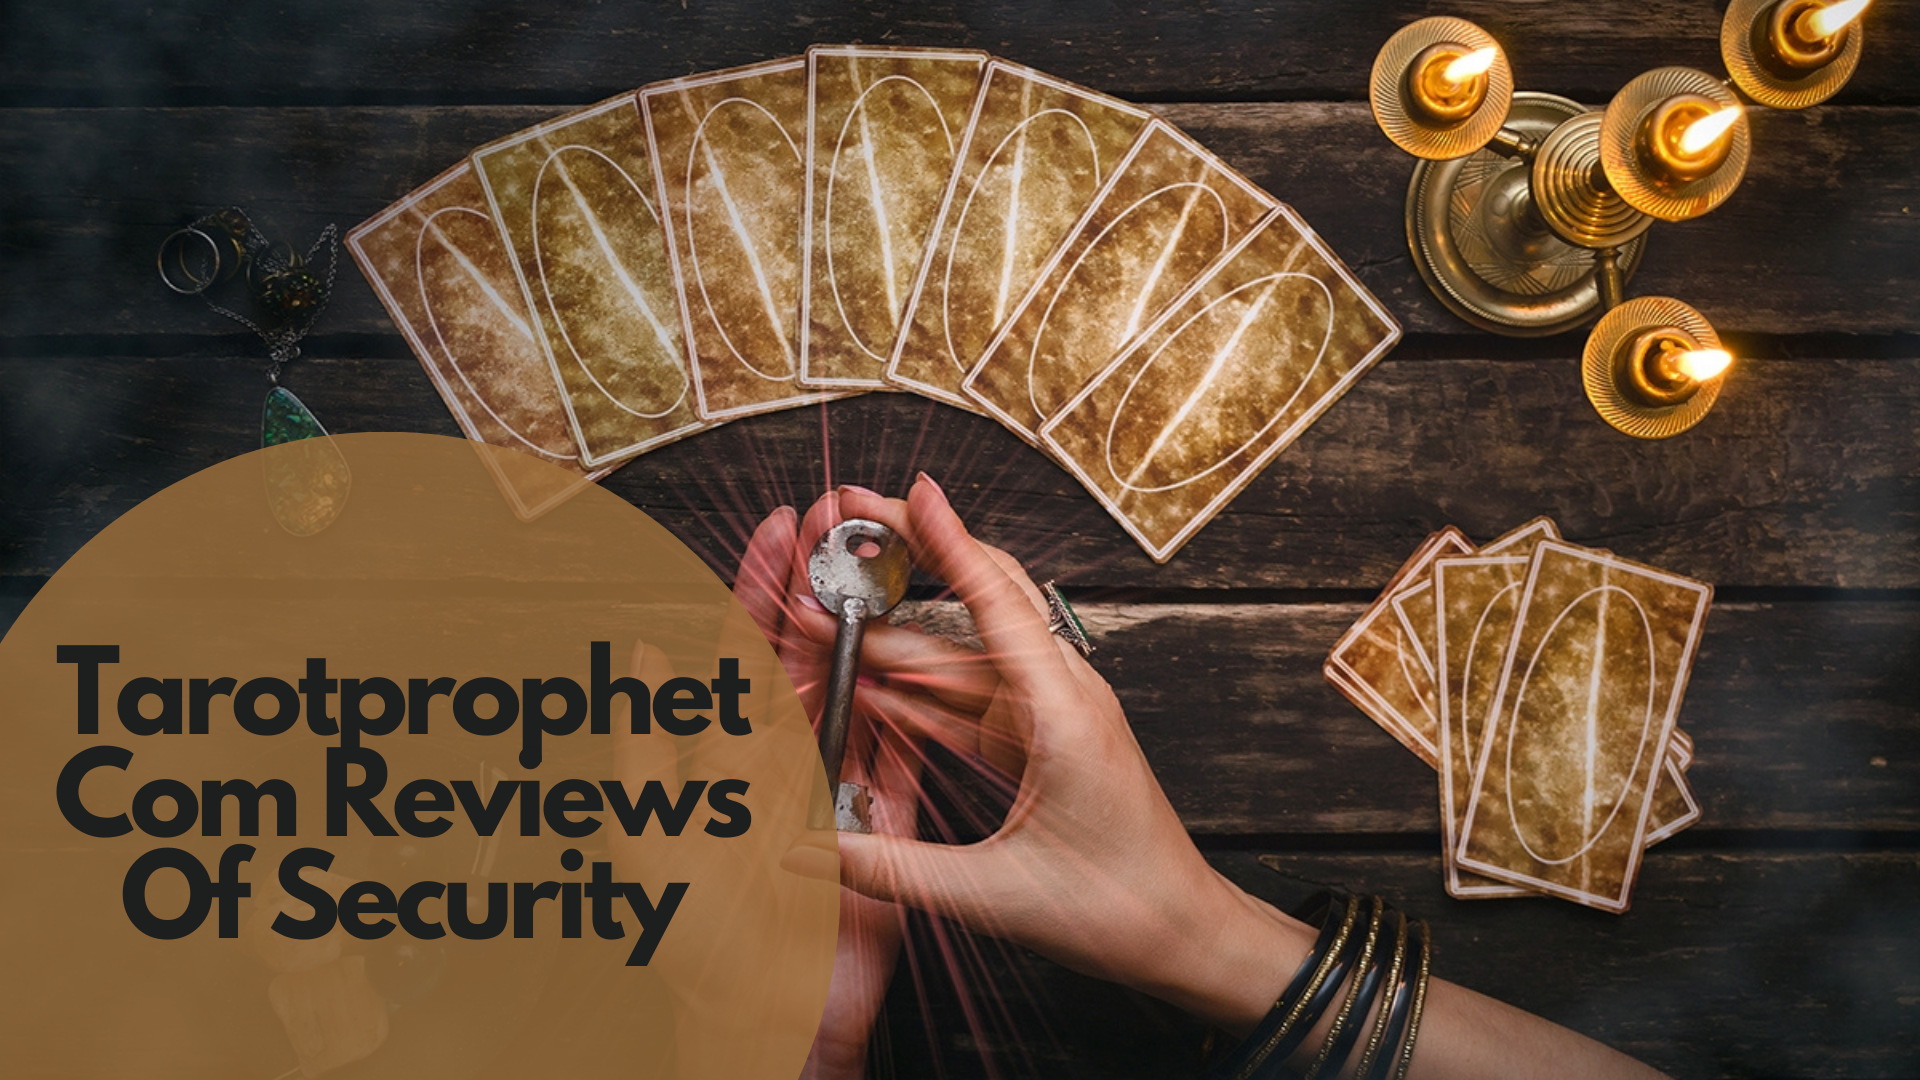 A person holding a key with tarot cards on the table and words Tarotprophet Com Reviews Of Security